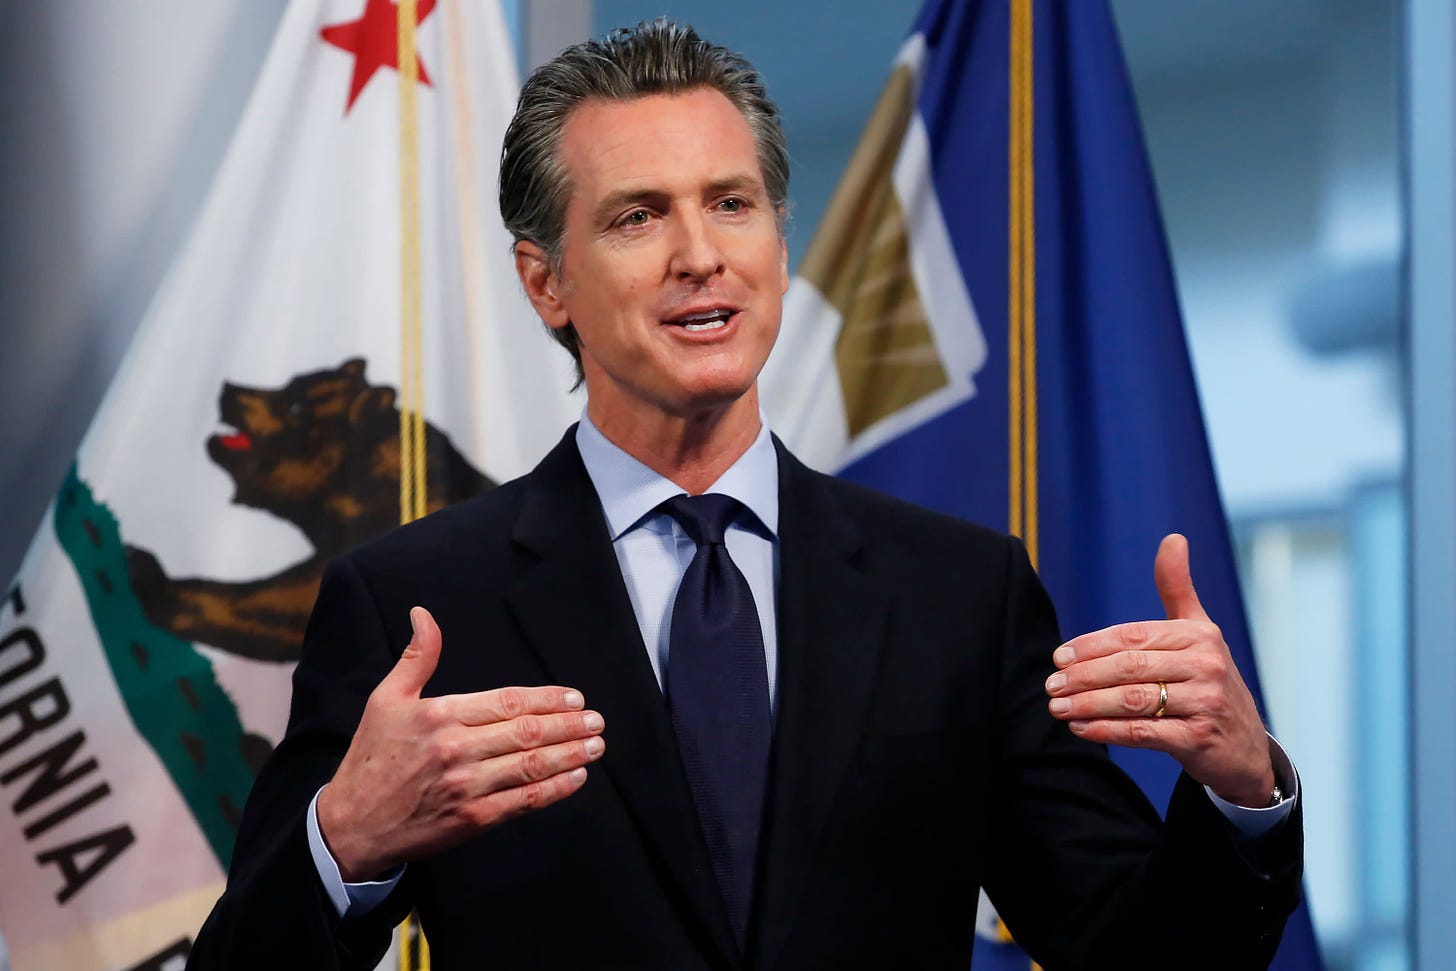 California governor unveils health guidelines for retailers, manufacturers  to reopen starting Friday